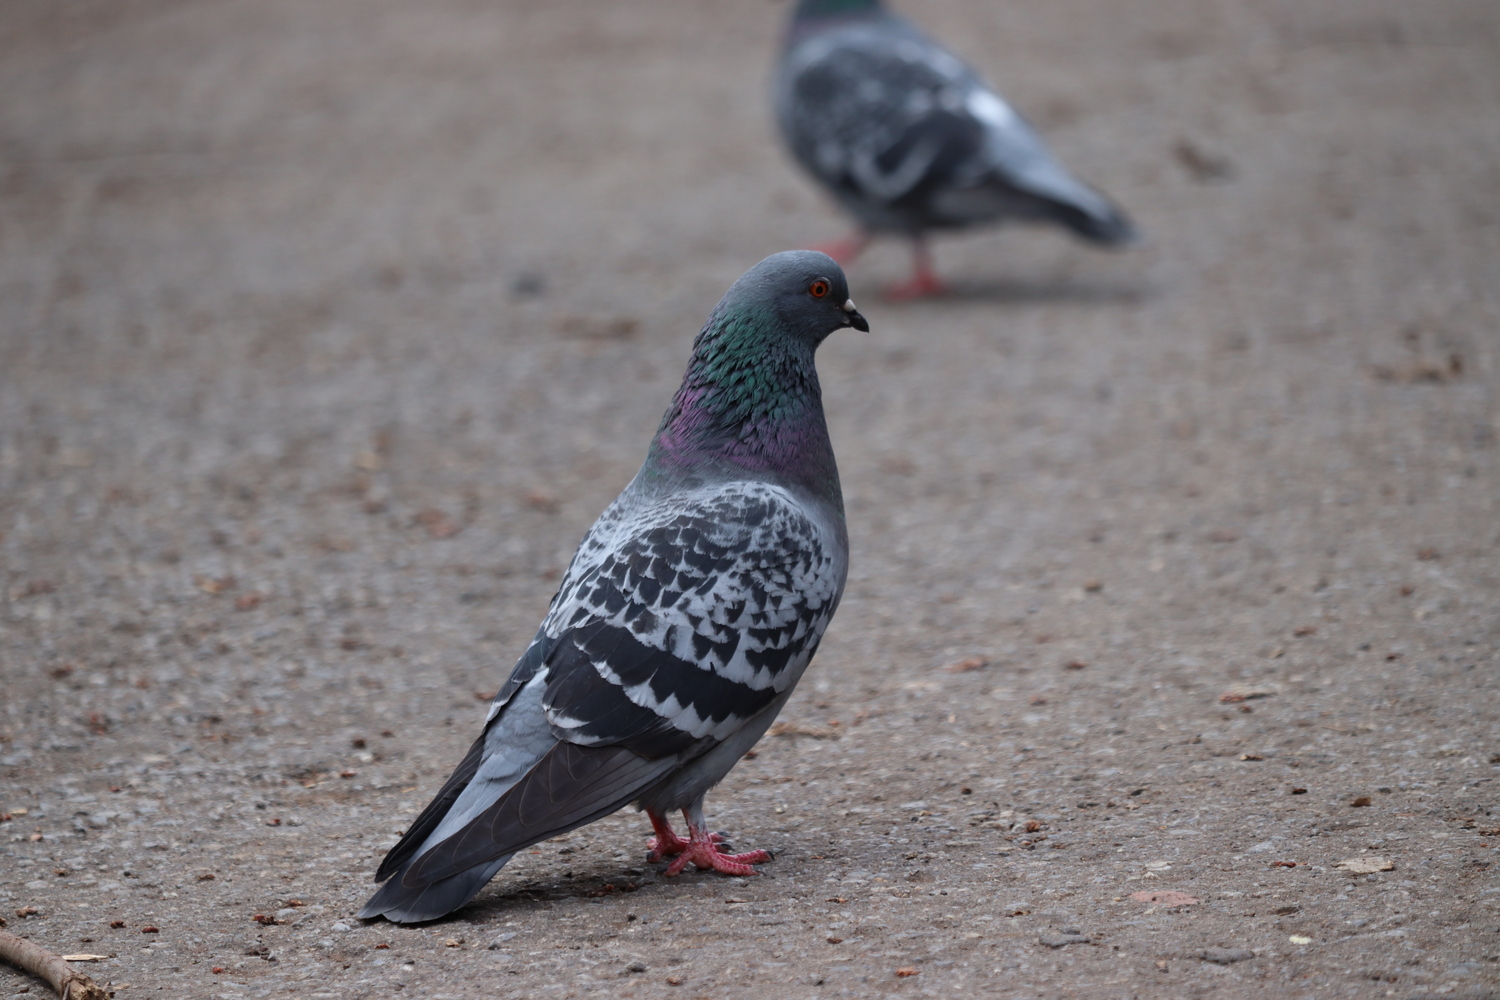 a pigeon standing upright on some concrete.
it's a usual grey city pigeon,
with a mix of light and dark feathers
on its wings,
purple and green areas up its neck,
and red feet.
in the blurred background
another pigeon is strutting past.